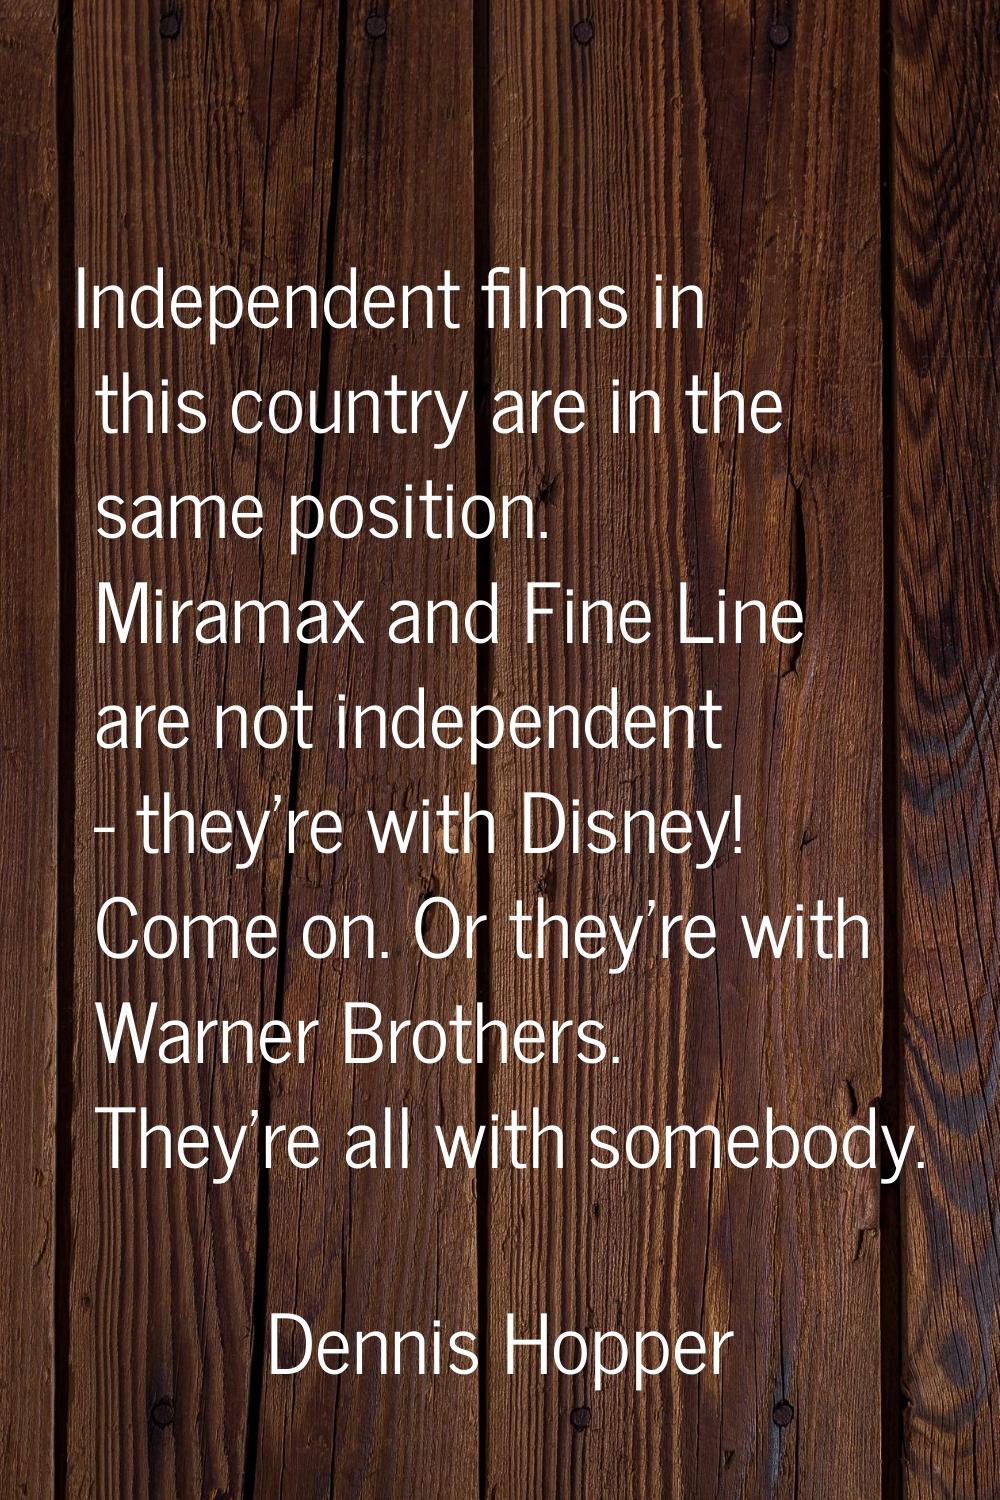 Independent films in this country are in the same position. Miramax and Fine Line are not independe